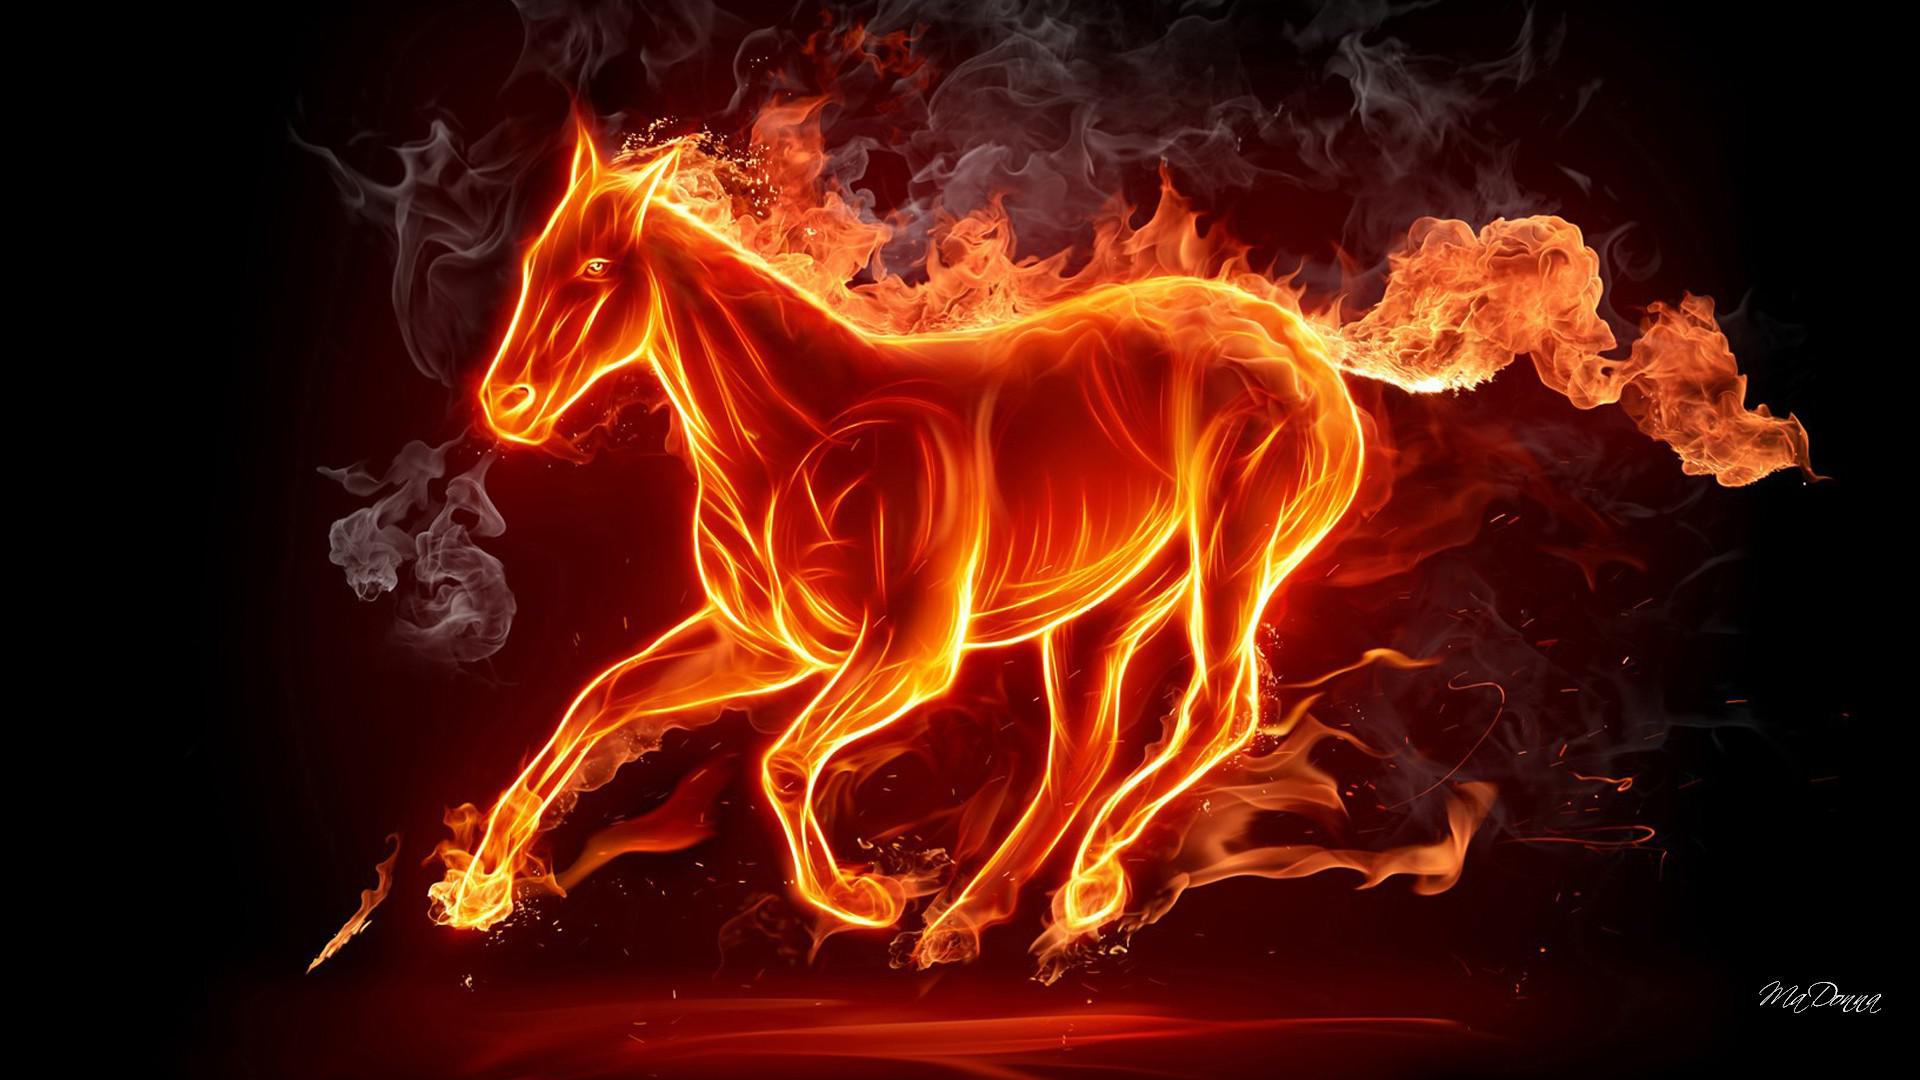 Flaming horse - (#113501) - High Quality and Resolution Wallpapers ...